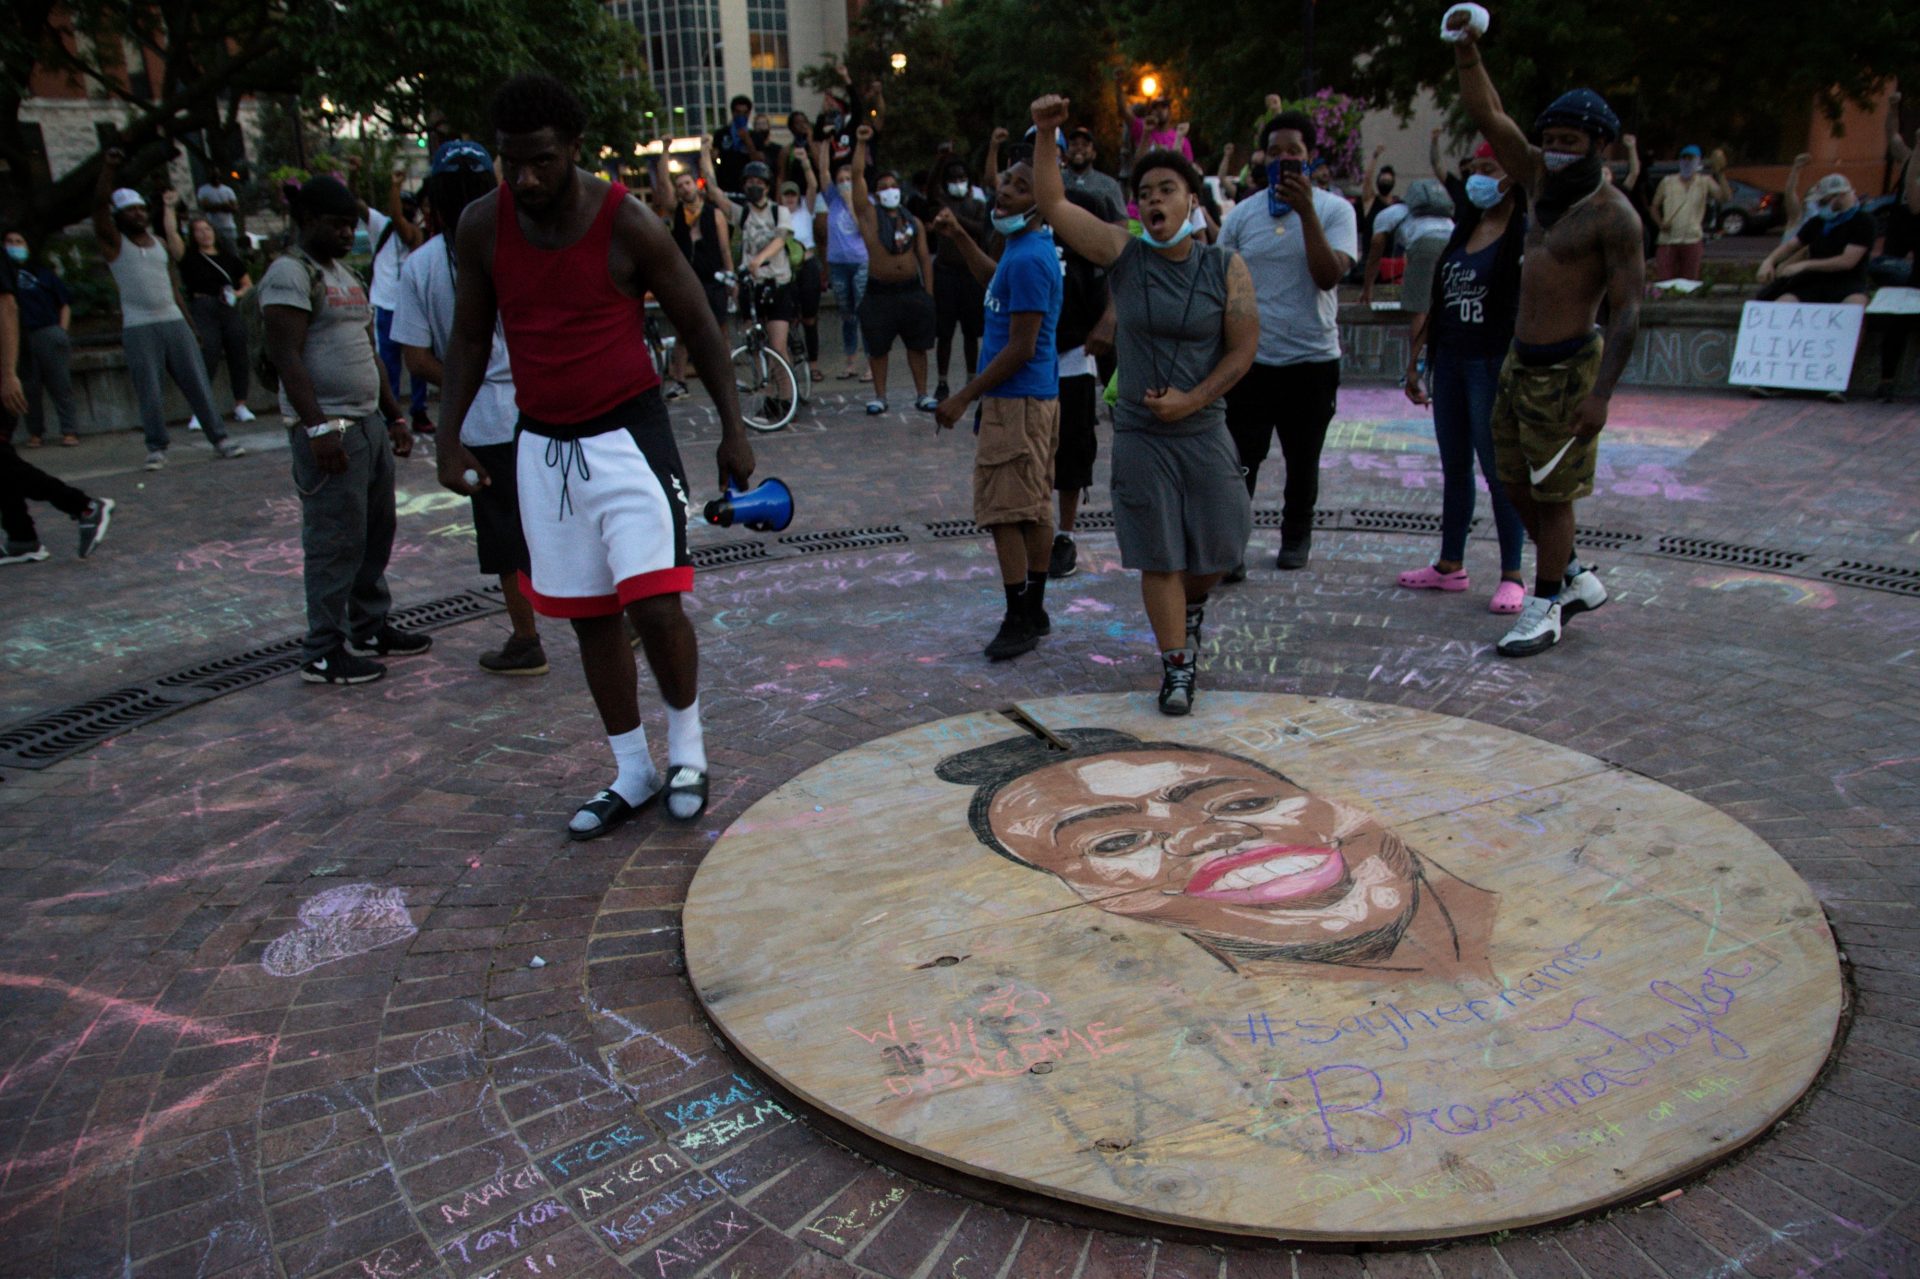 Taylor's name has become the foremost emblem of the protests against police violence in Louisville. Her face is painted and chalked throughout the city, including here at Jefferson Square Park in downtown Louisville.